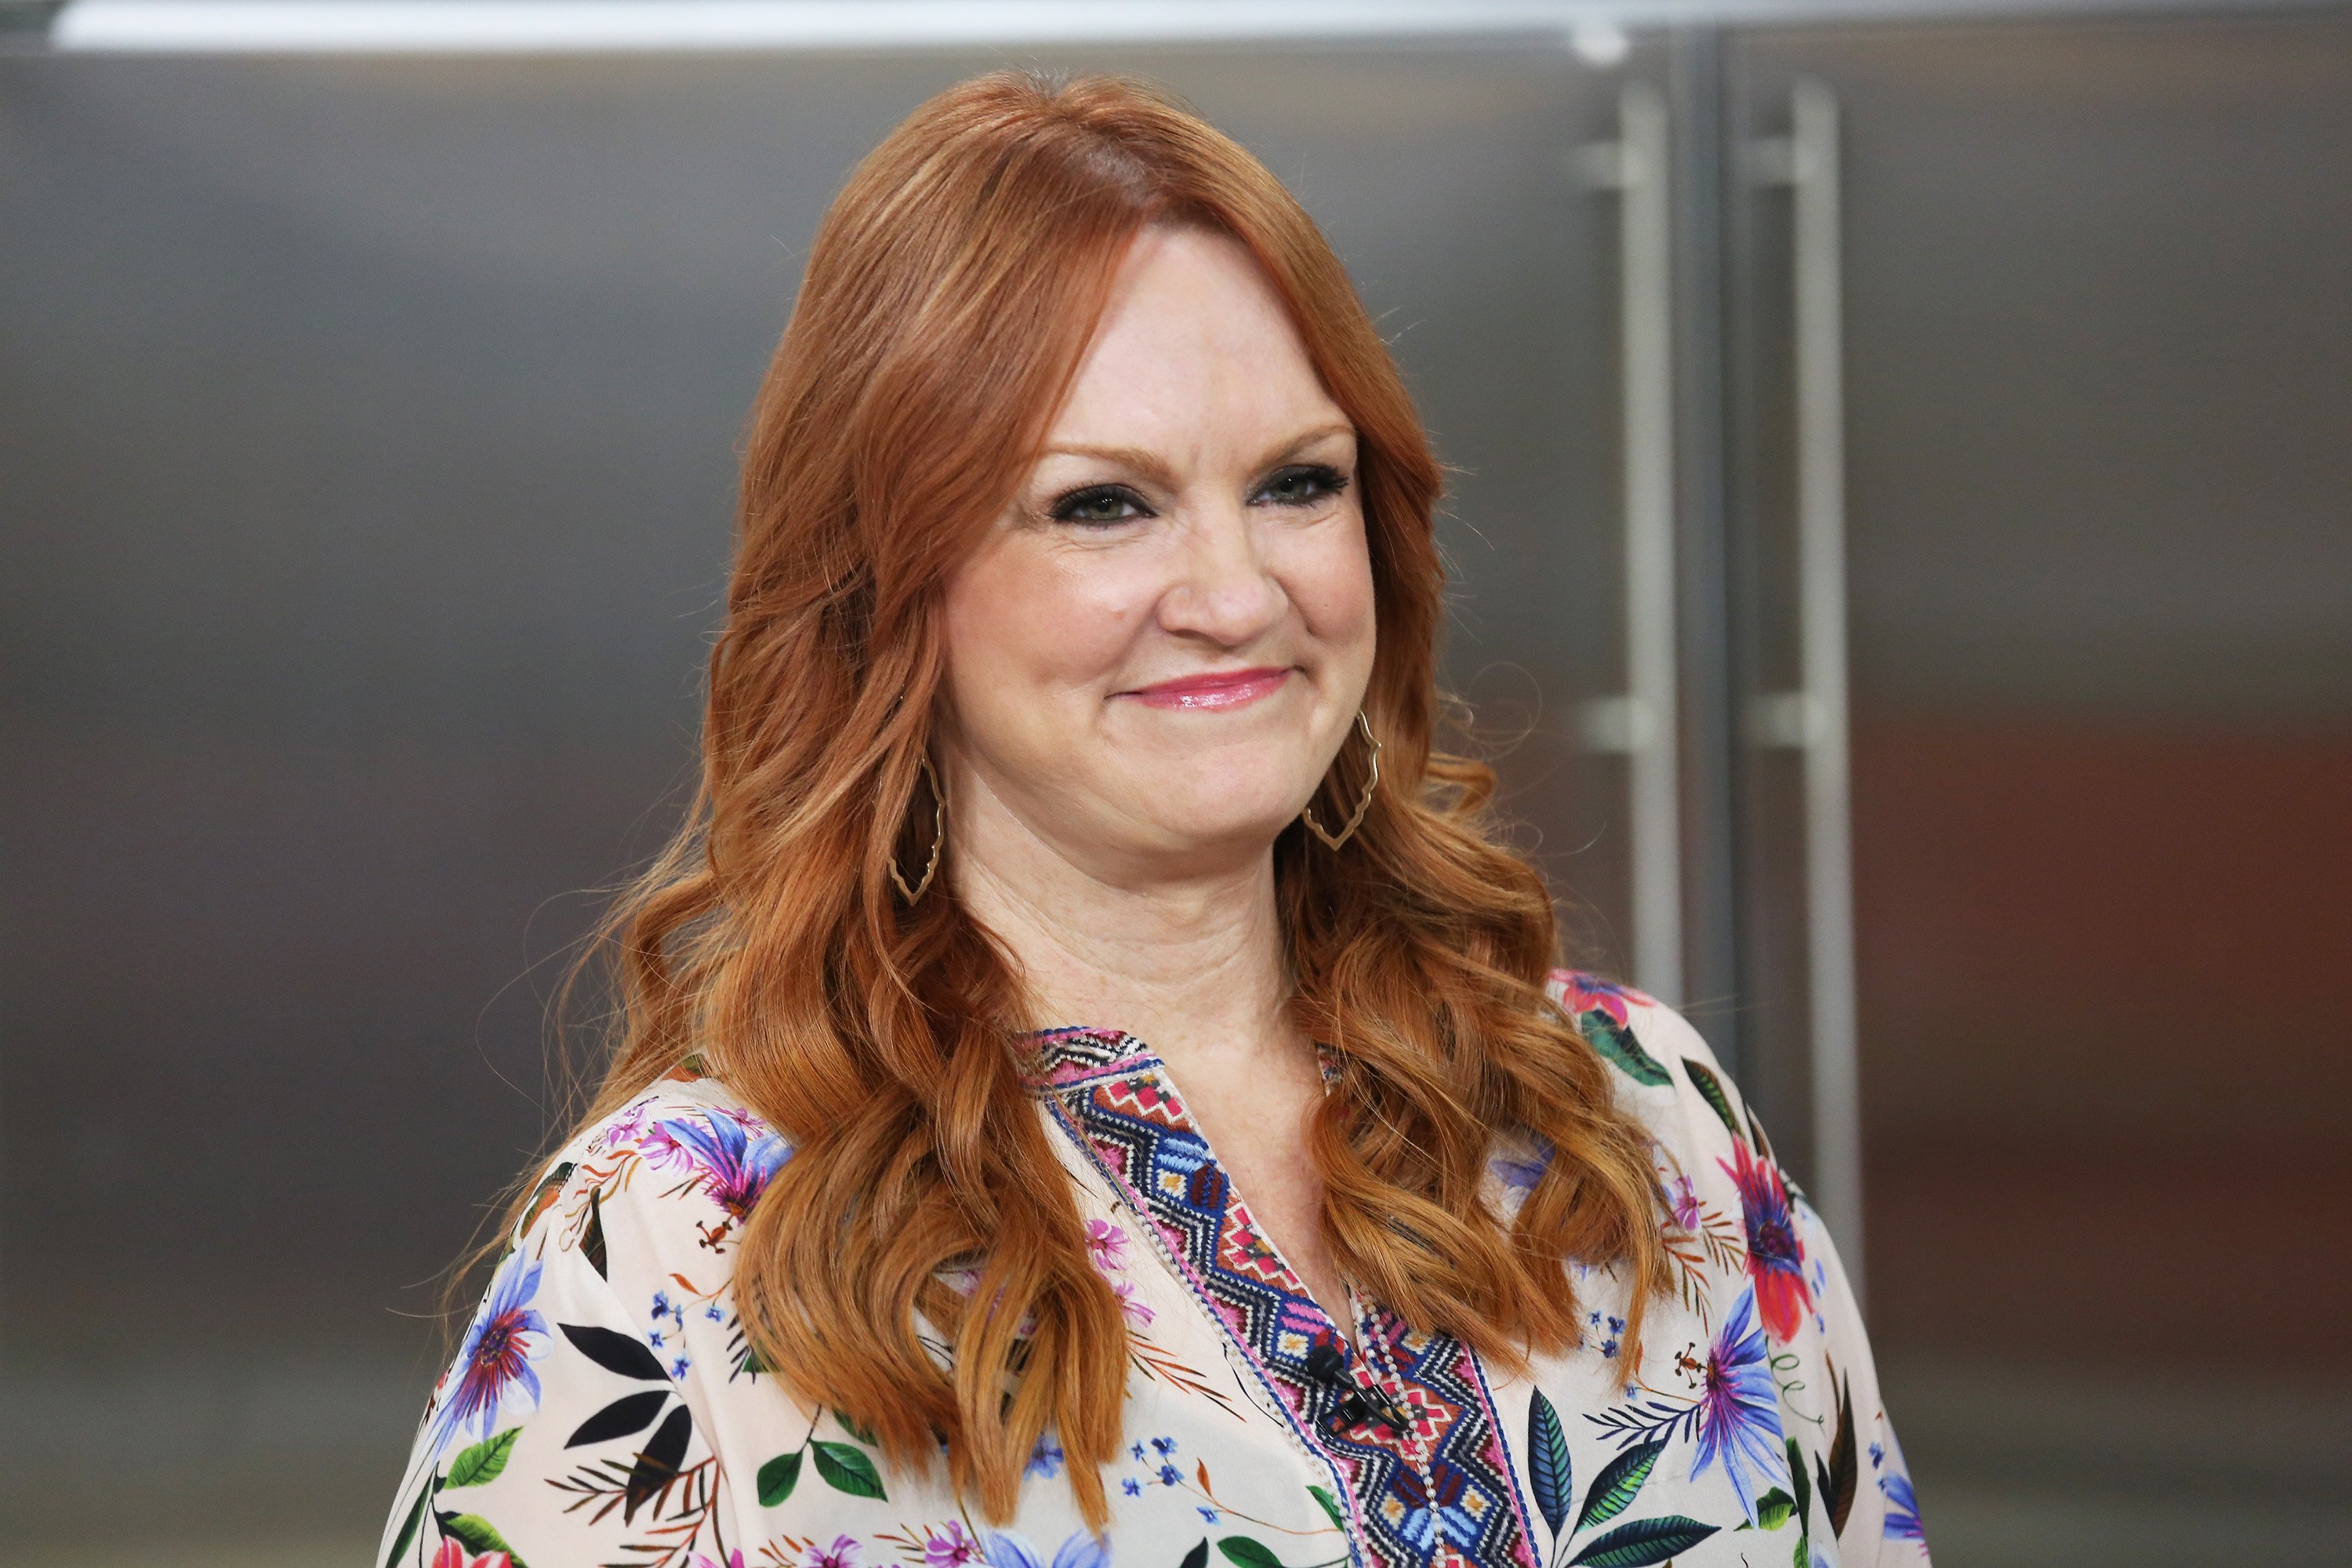 The Pioneer Woman Ree Drummond wears a floral shirt during an appearance on the Today show.